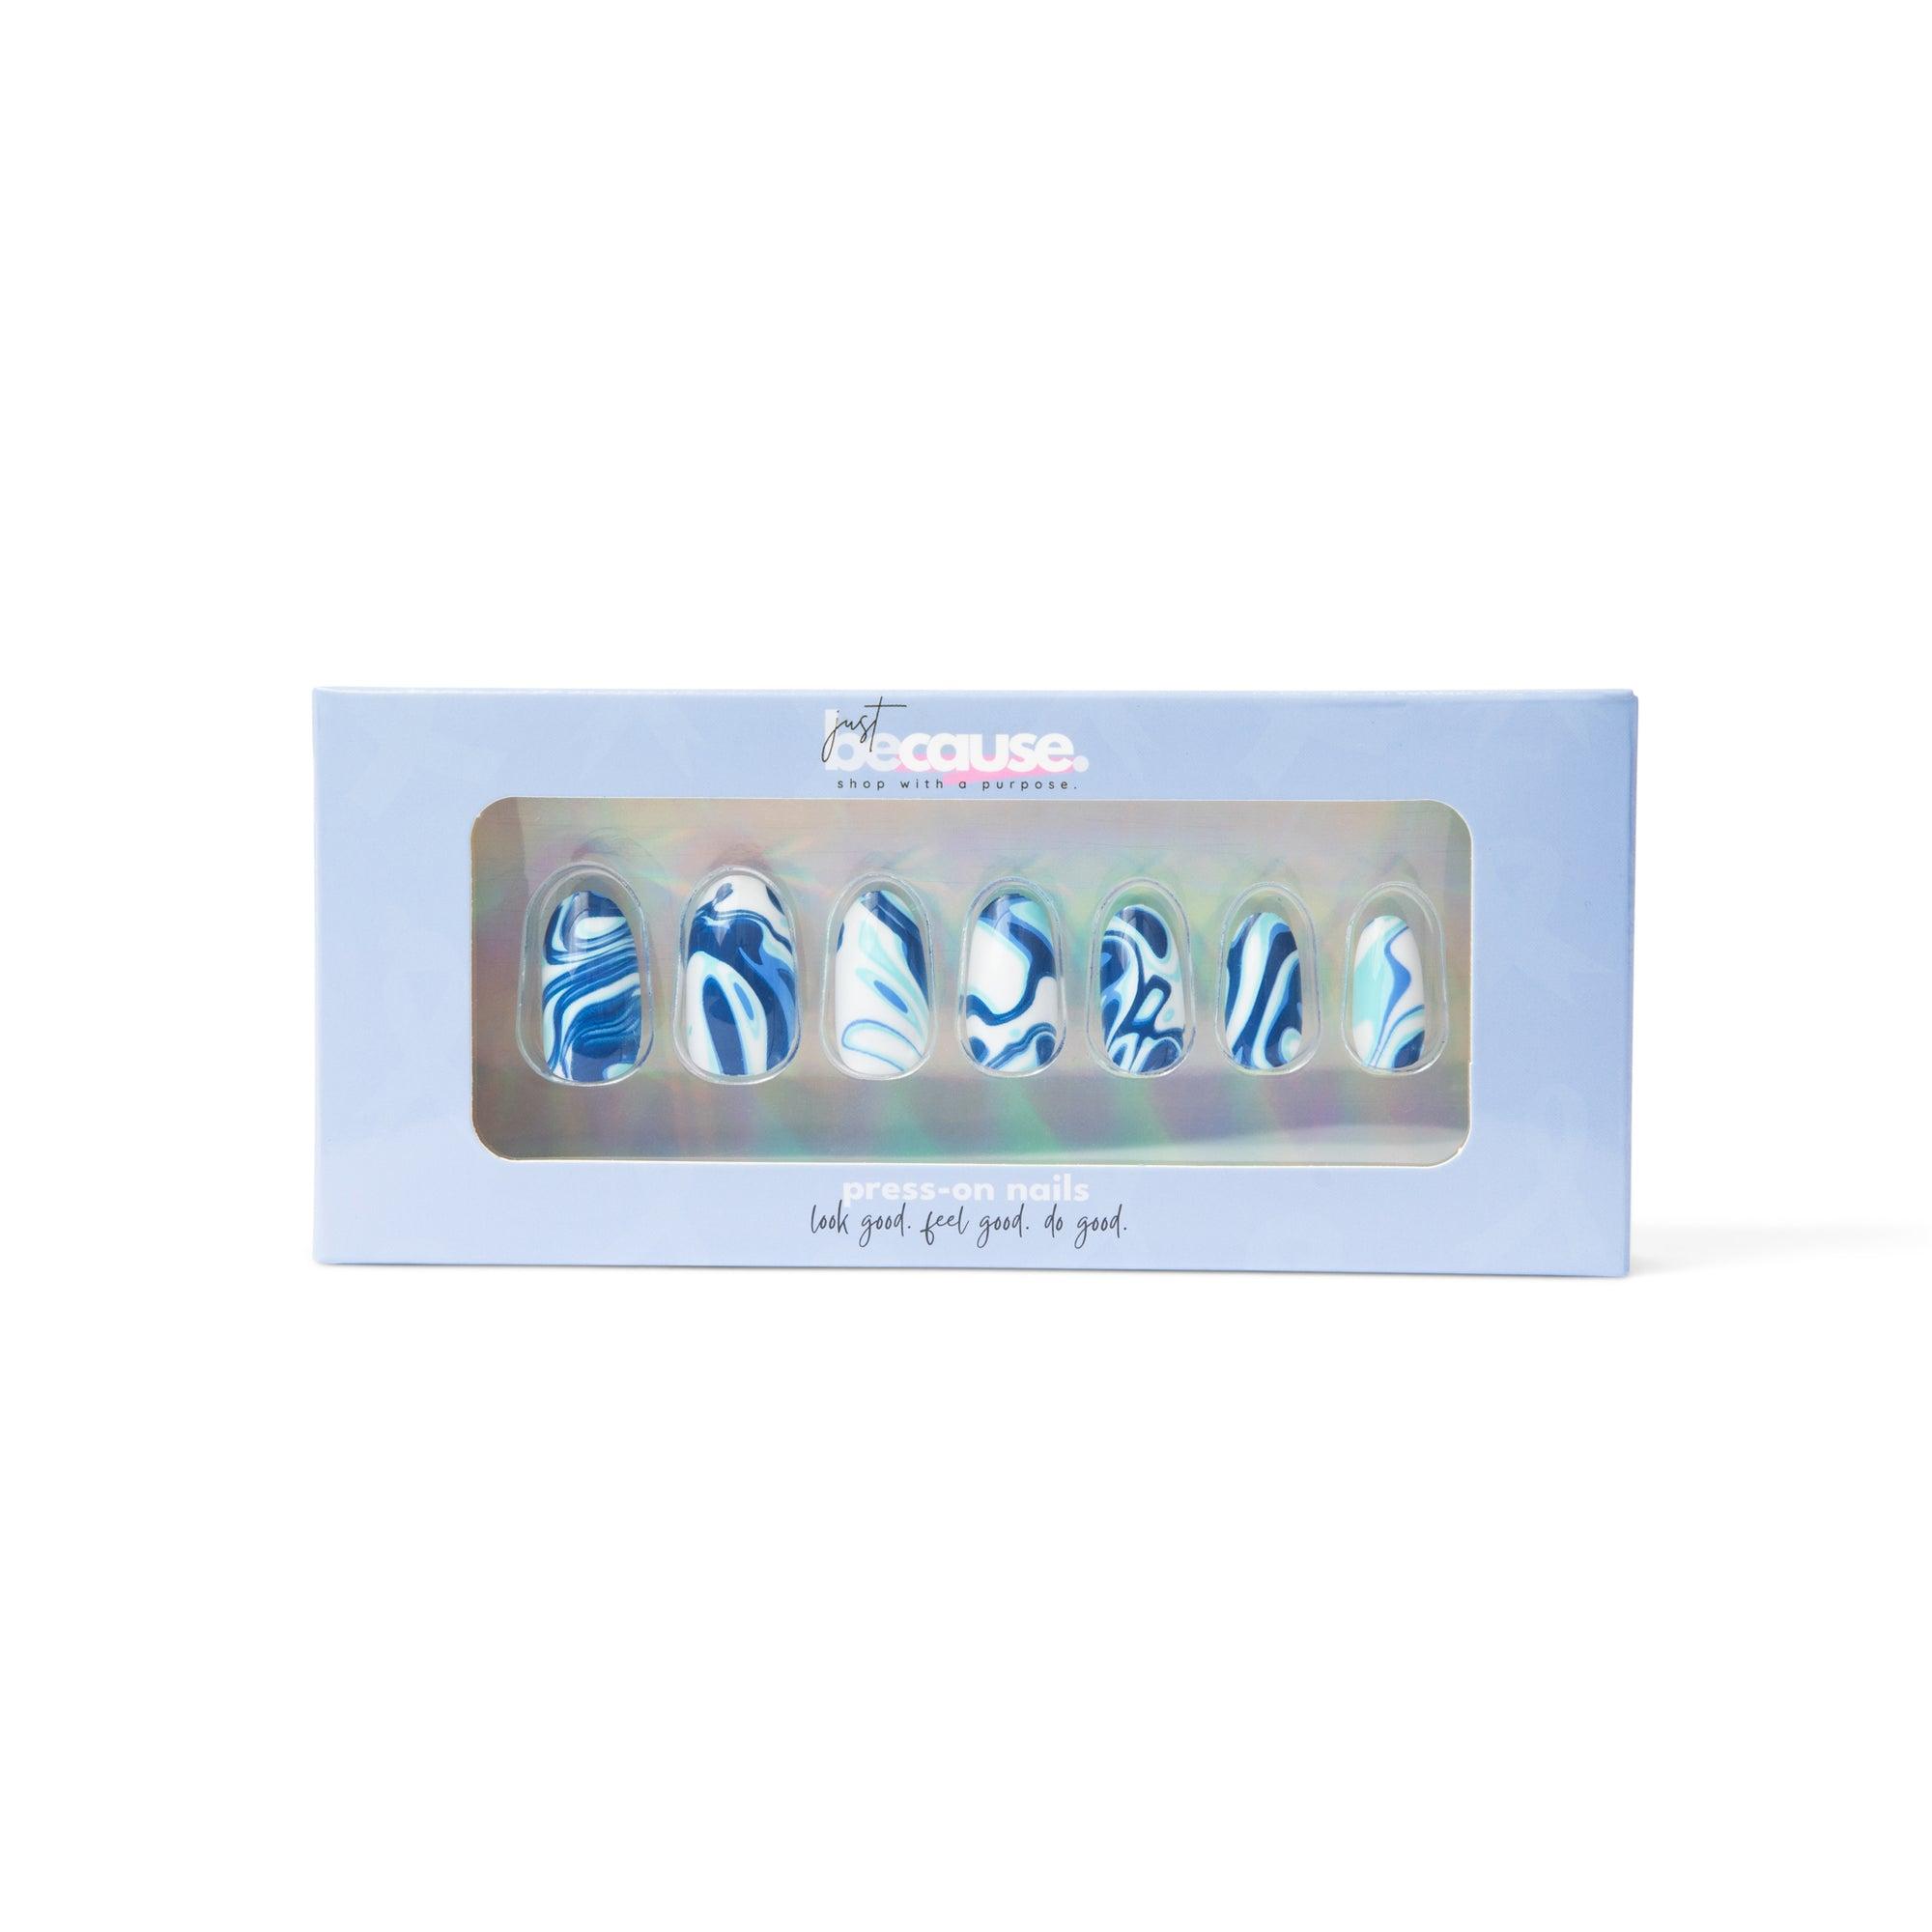 Just BeCause 24 Pcs ABS Press on nails Medium, Blue and White marbled Fake Nails, Support T1D - ExpressionMed.comJust BeCause 24 Pcs ABS Press on nails Medium, Blue and White marbled Fake Nails, Support T1D - ExpressionMed.com